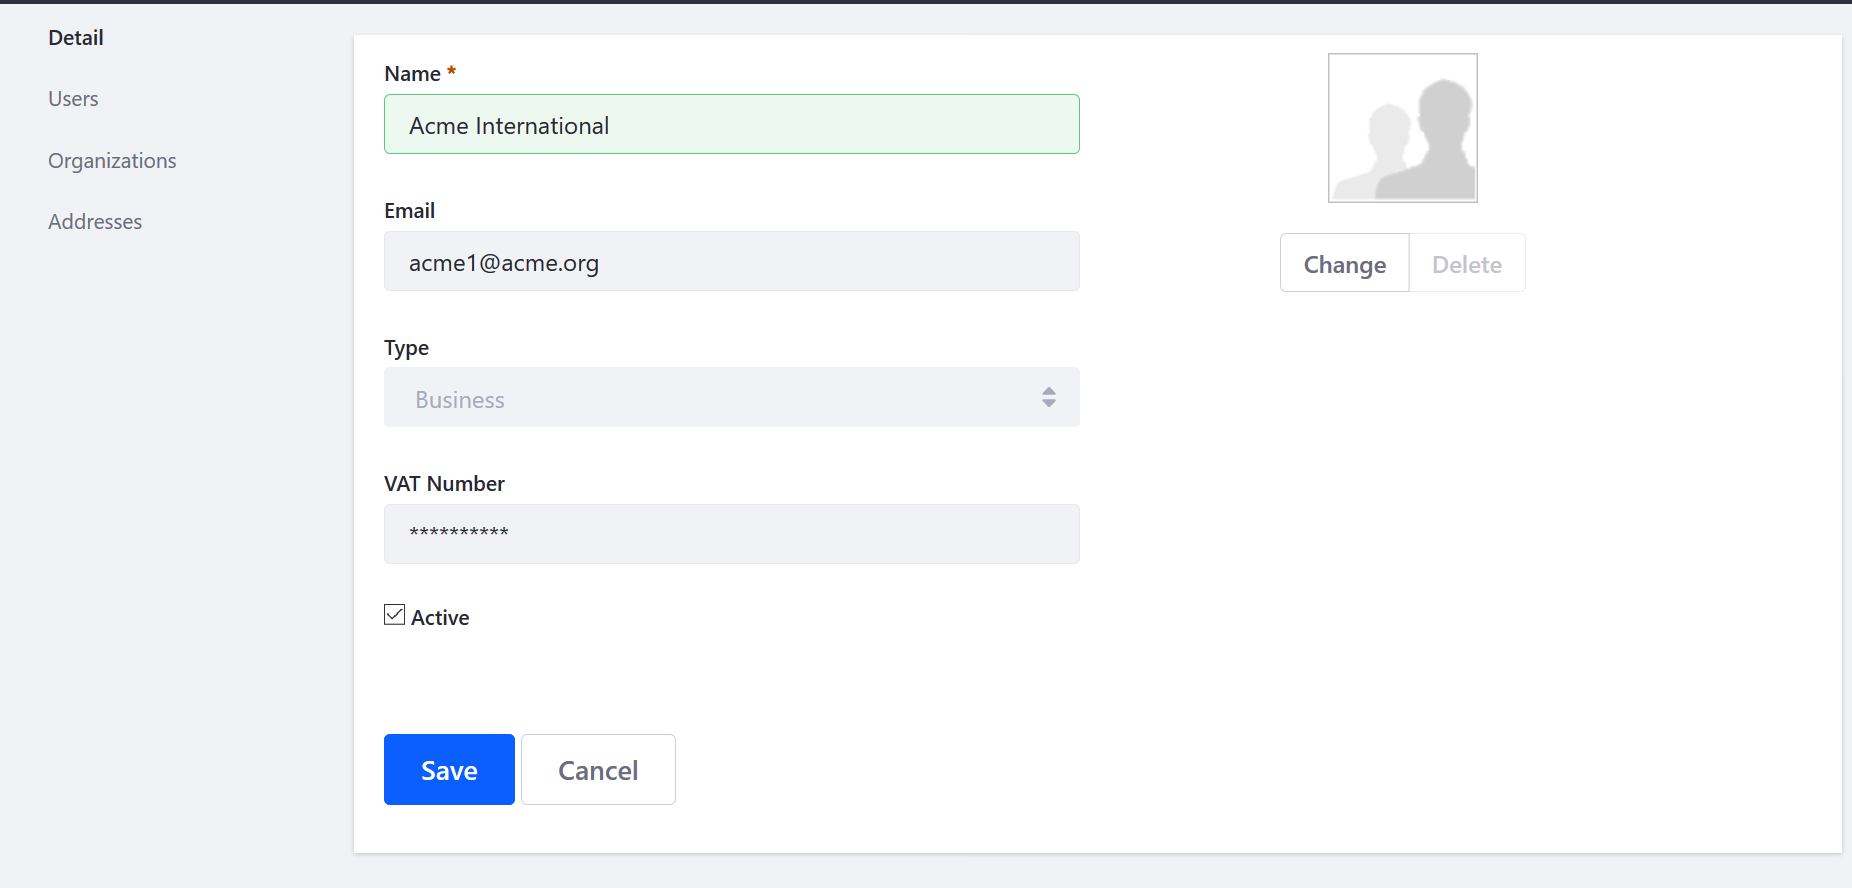 Creating a New Account in the Control Panel